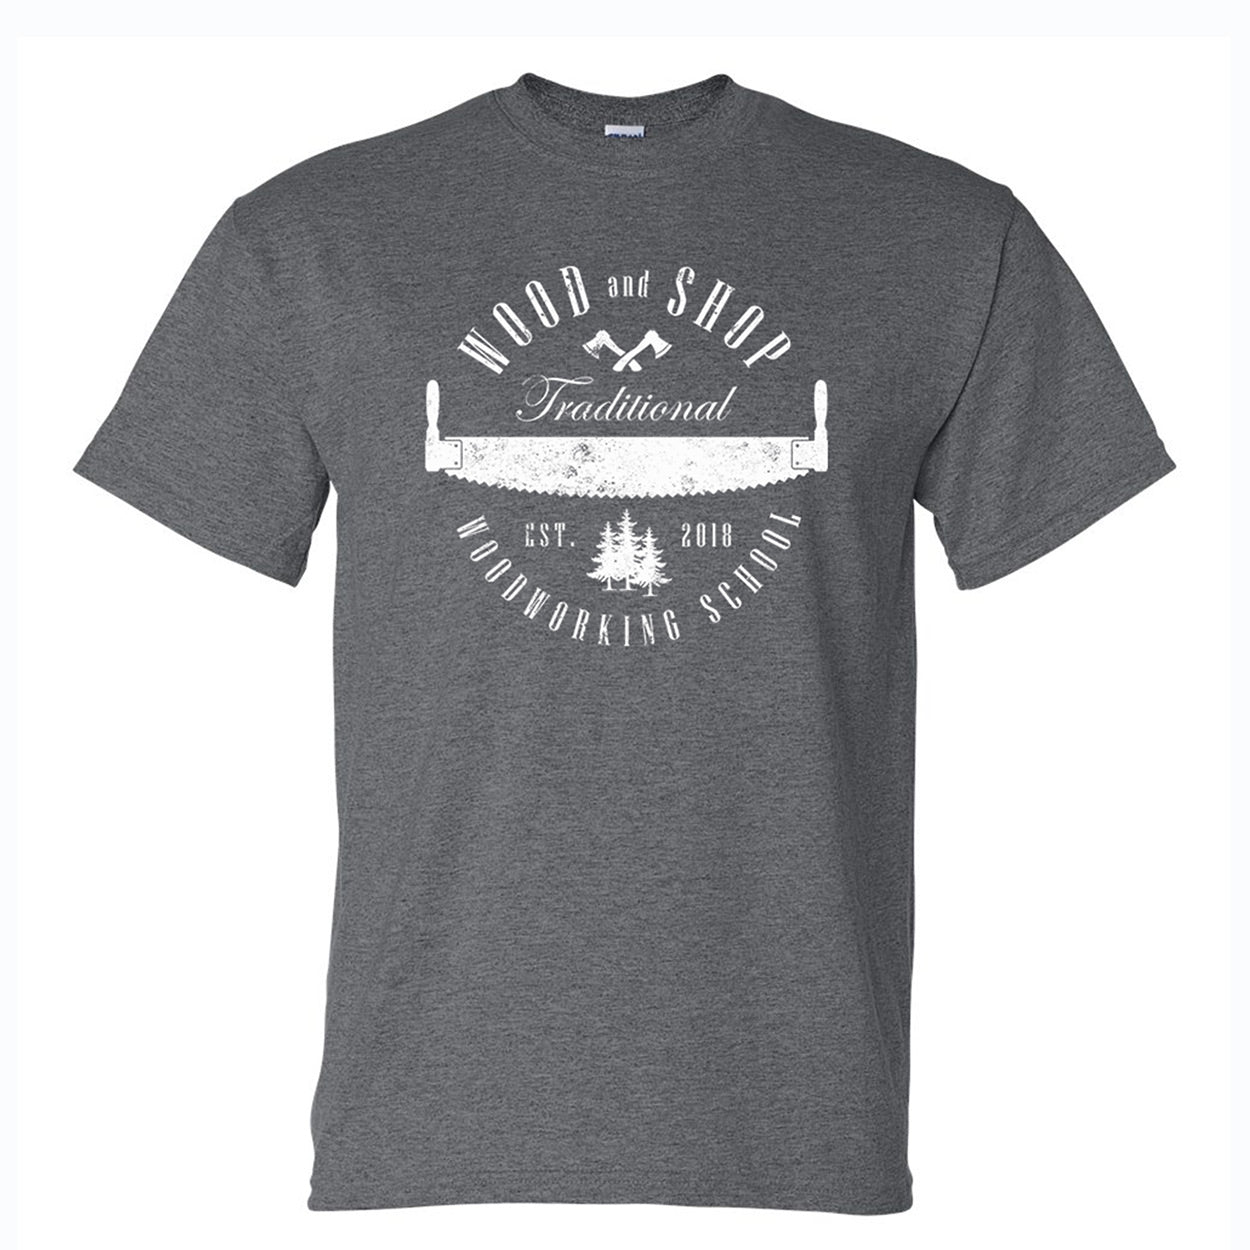 “Wood and Shop” Traditional Woodworking School T-Shirt (Multiple Colors)